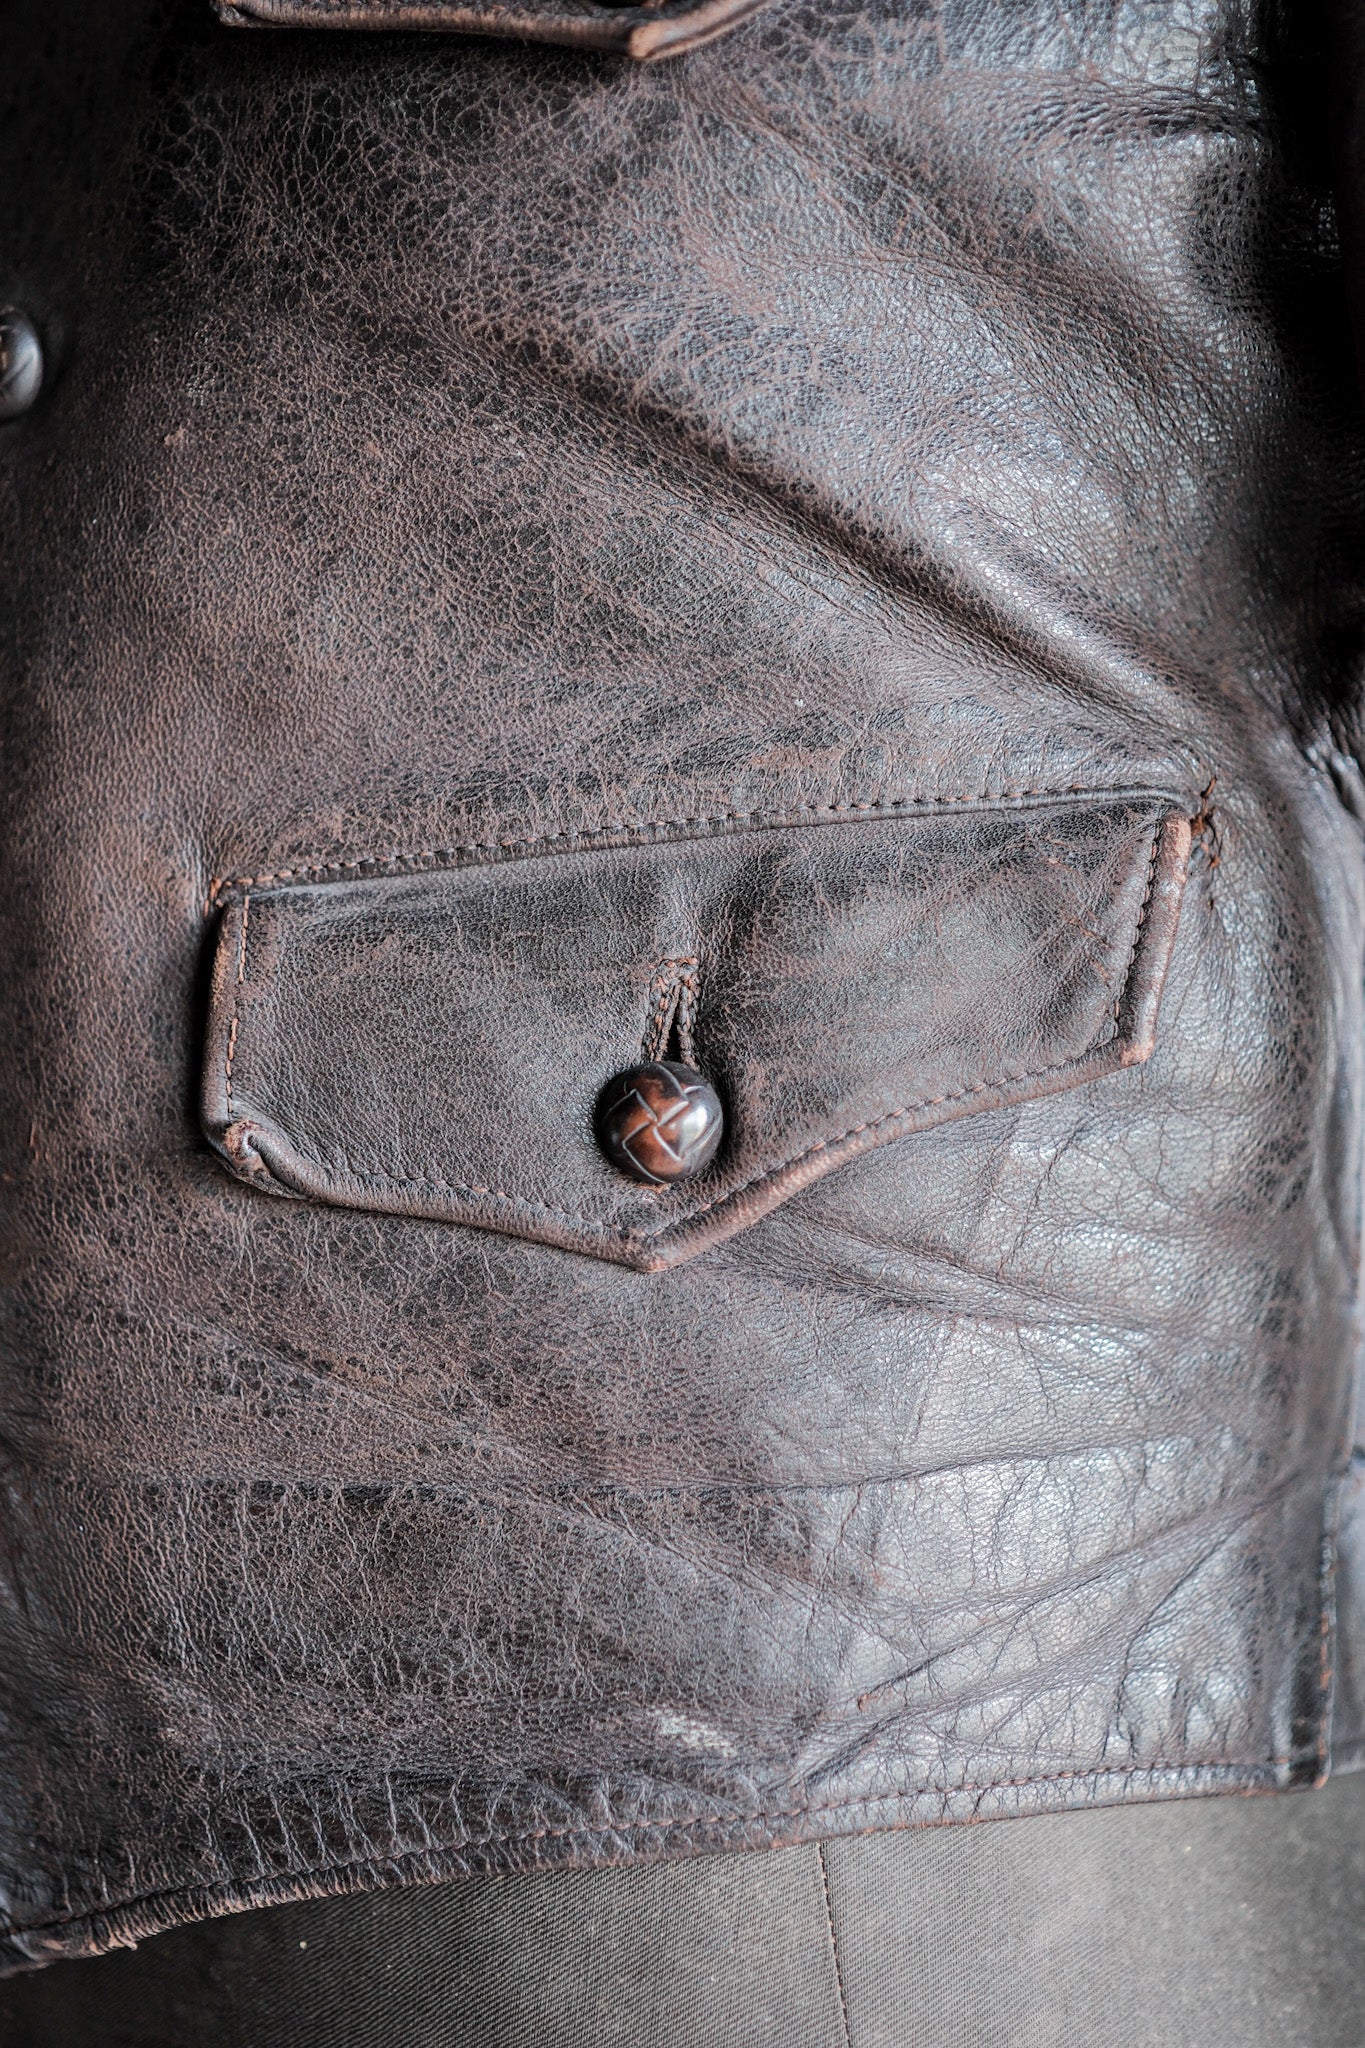 【~40's】German Vintage Double Breasted Motorcycle Leather Jacket